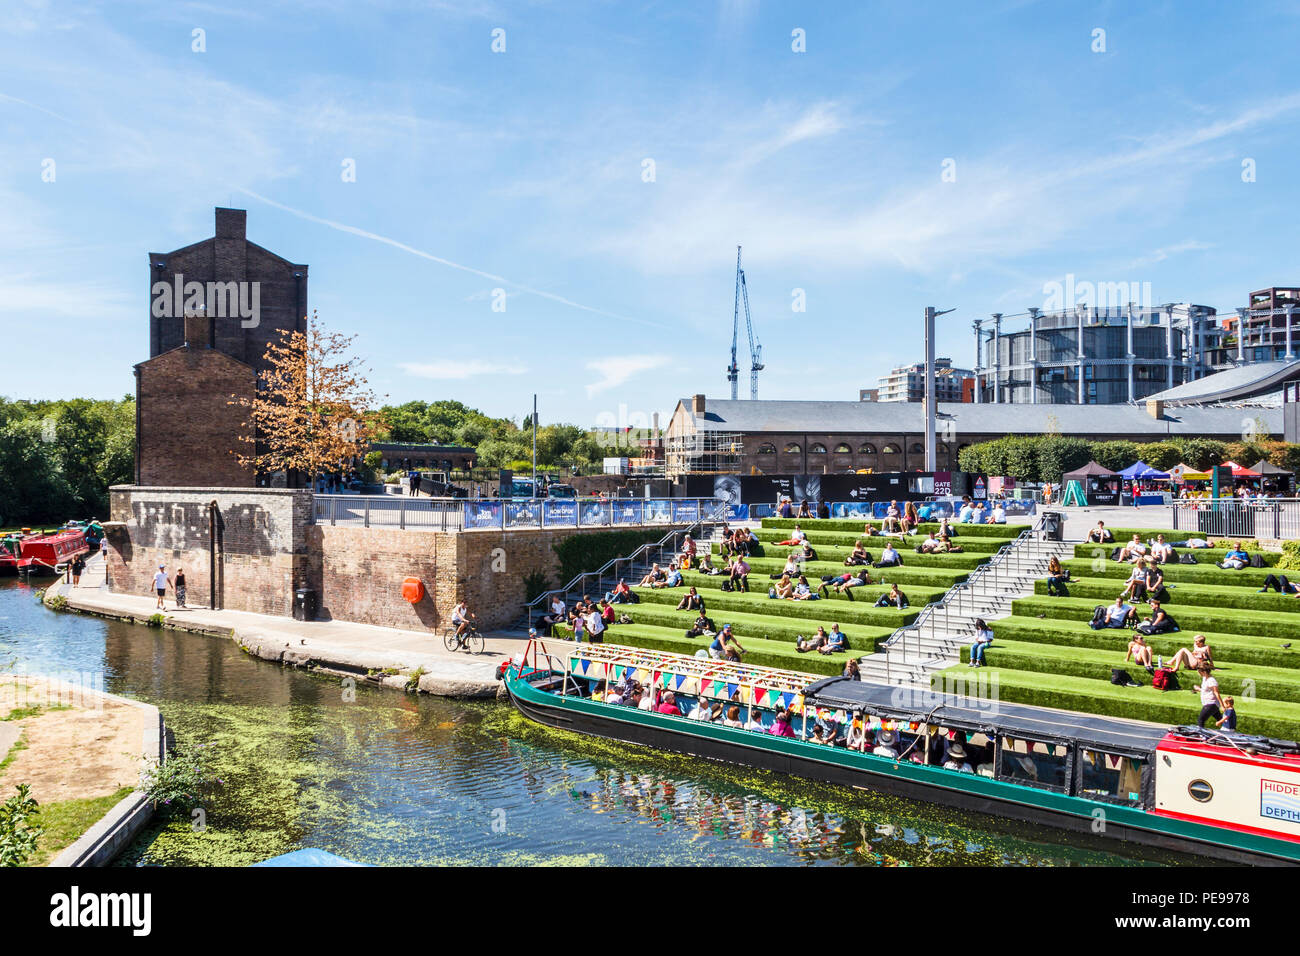 As temperatures rise, Londoners sun themselves on the steps by Regent's Canal at King's Cross, London, UK Stock Photo